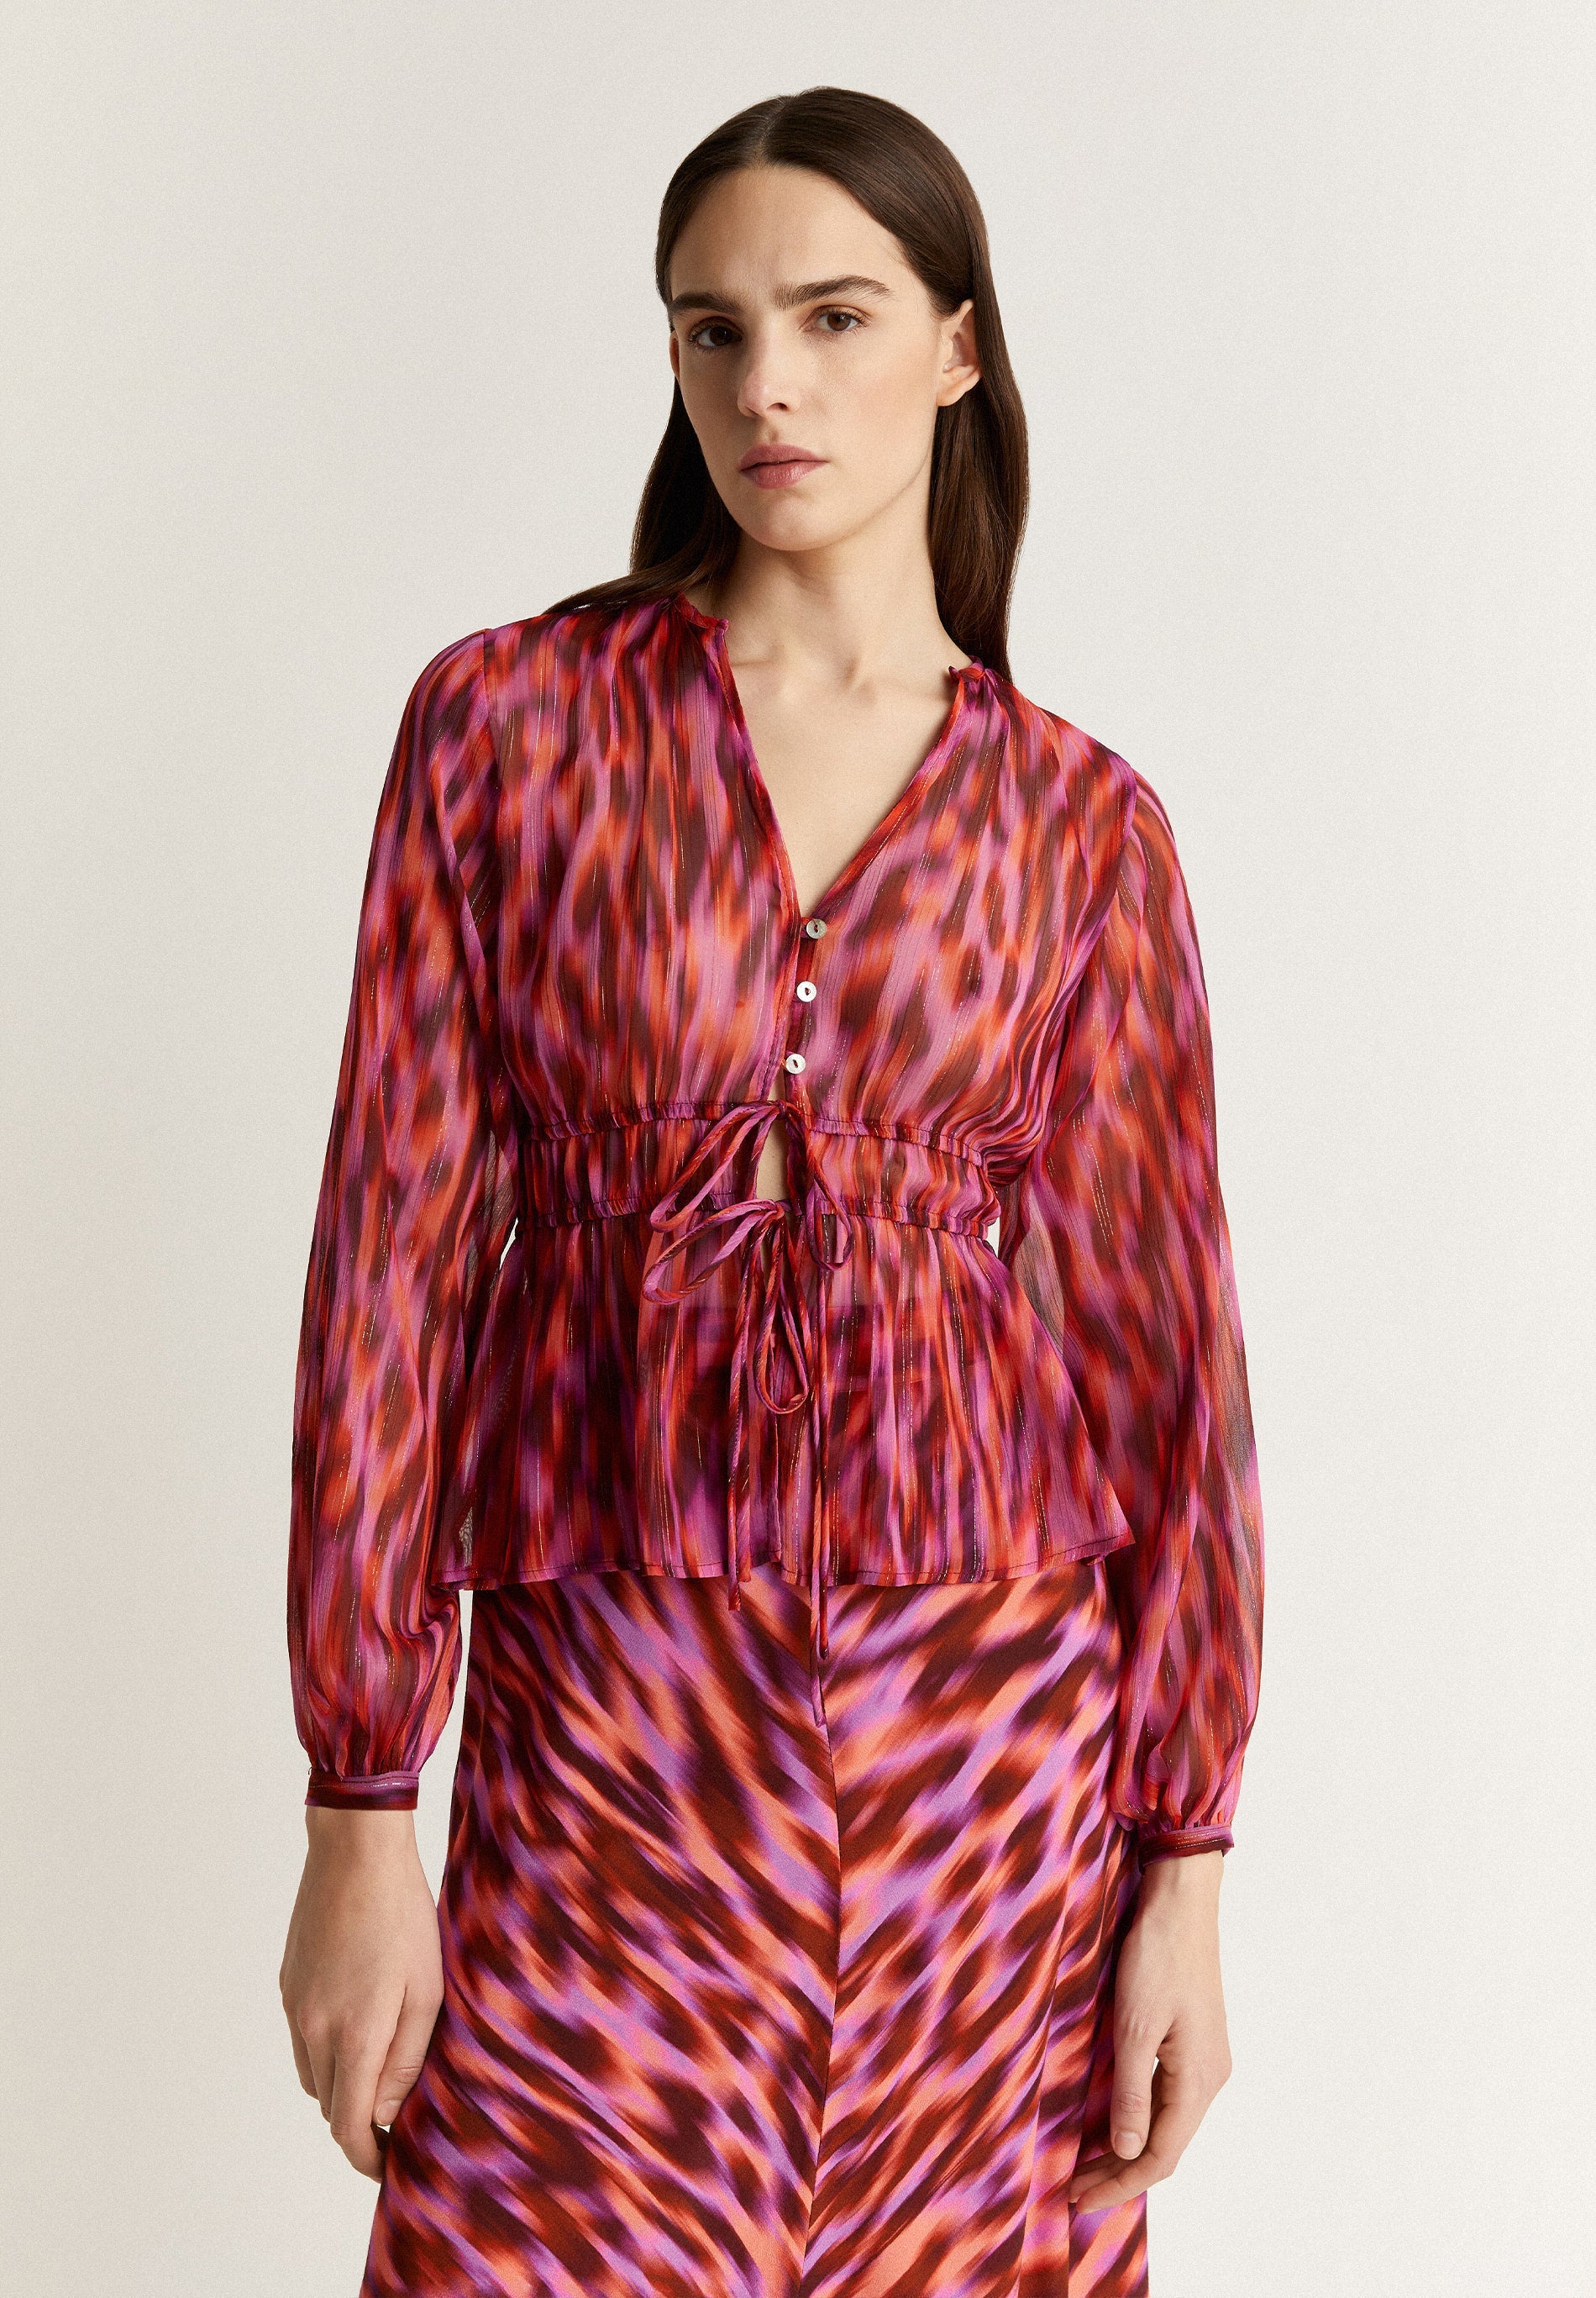 PRINTED BLOUSE WITH LUREX